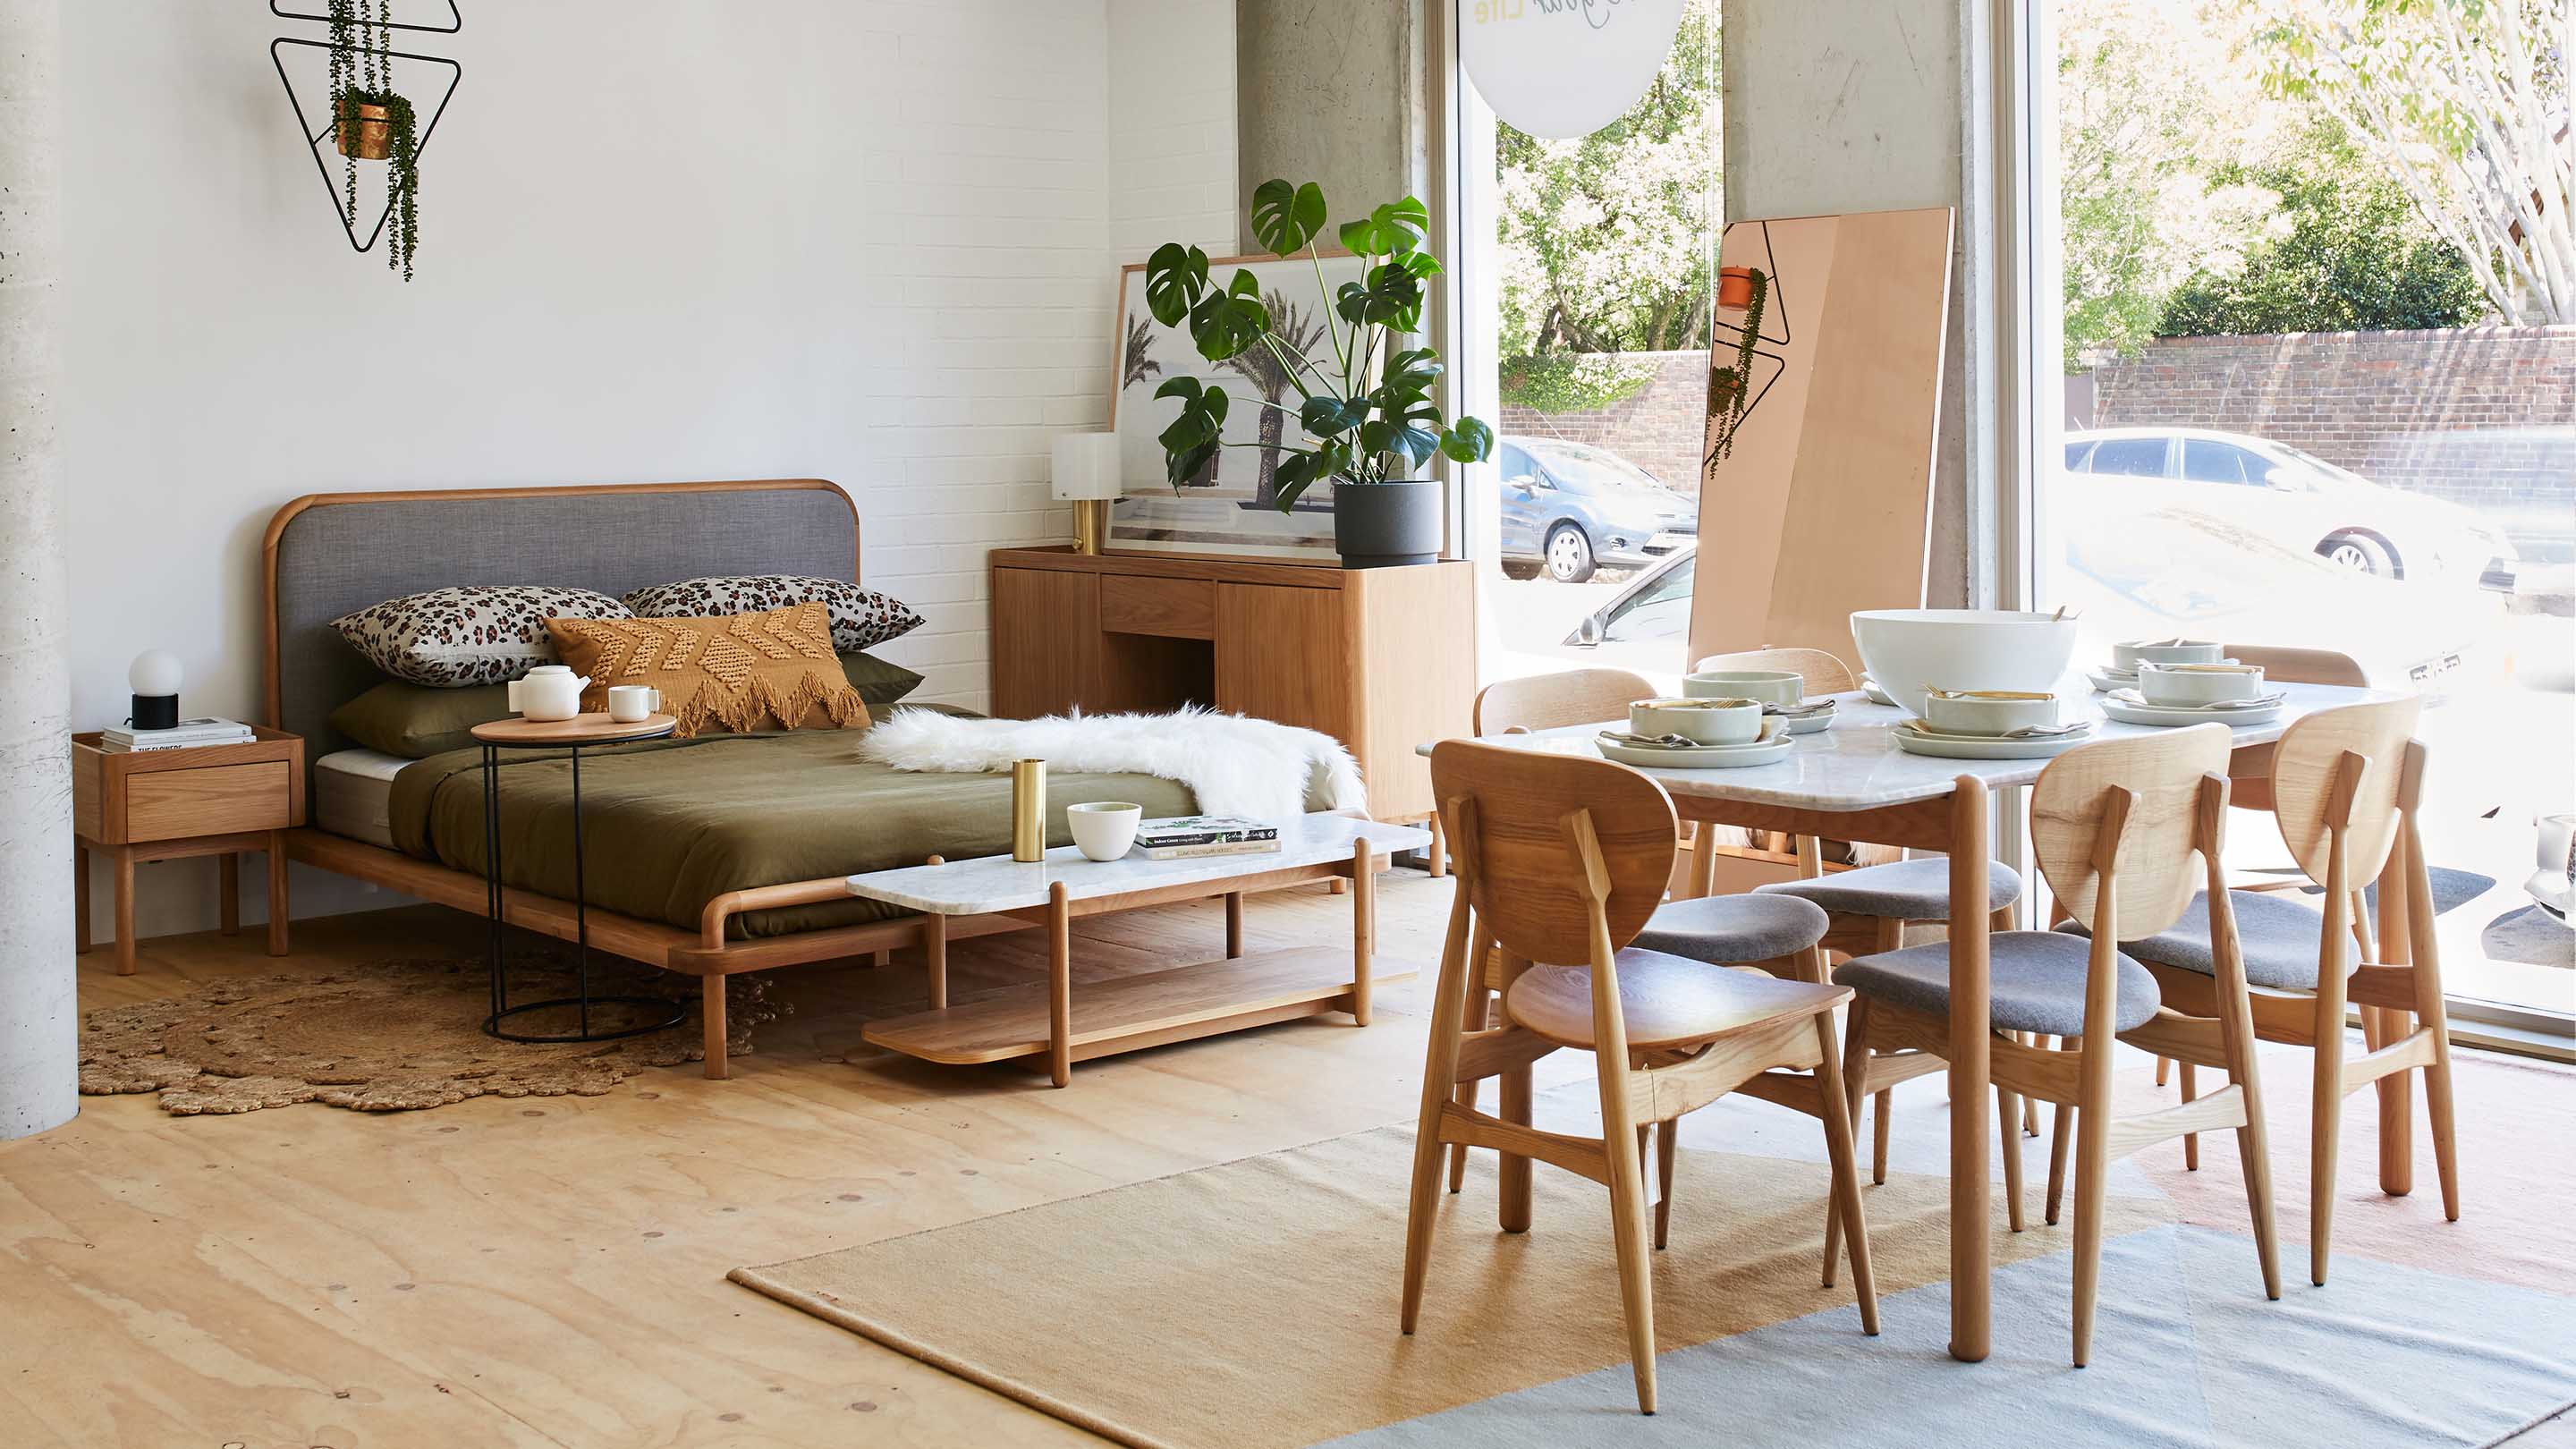 Shop furniture and homewares in our Sydney and Melbourne showrooms.